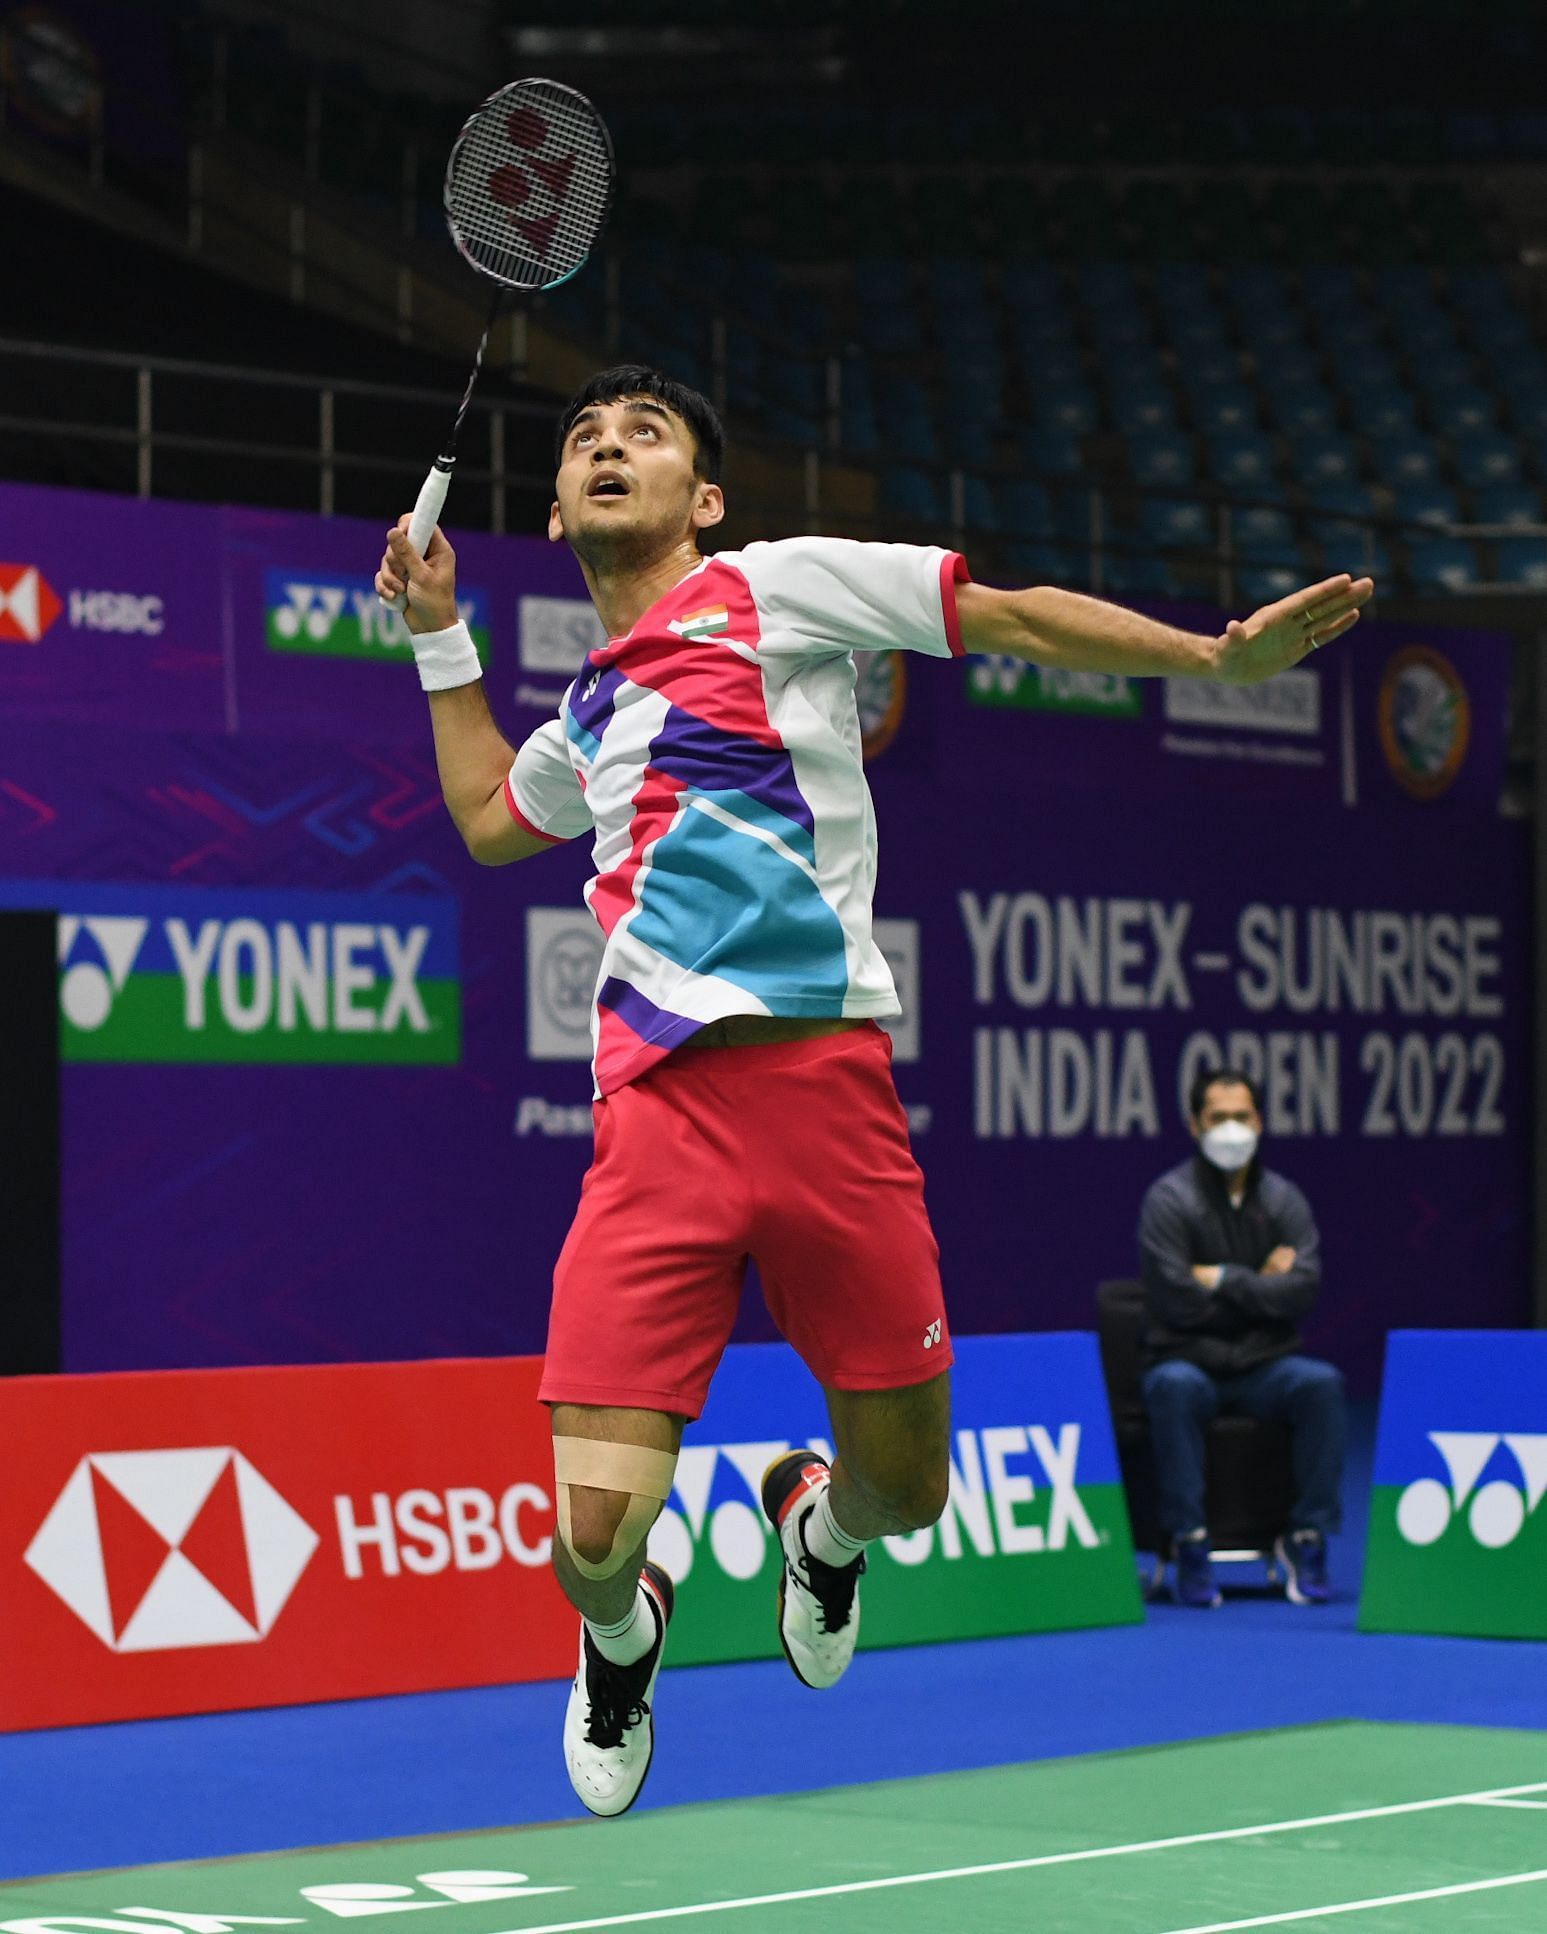 Lakshya Sen won the India Open 2022 early this month in New Delhi